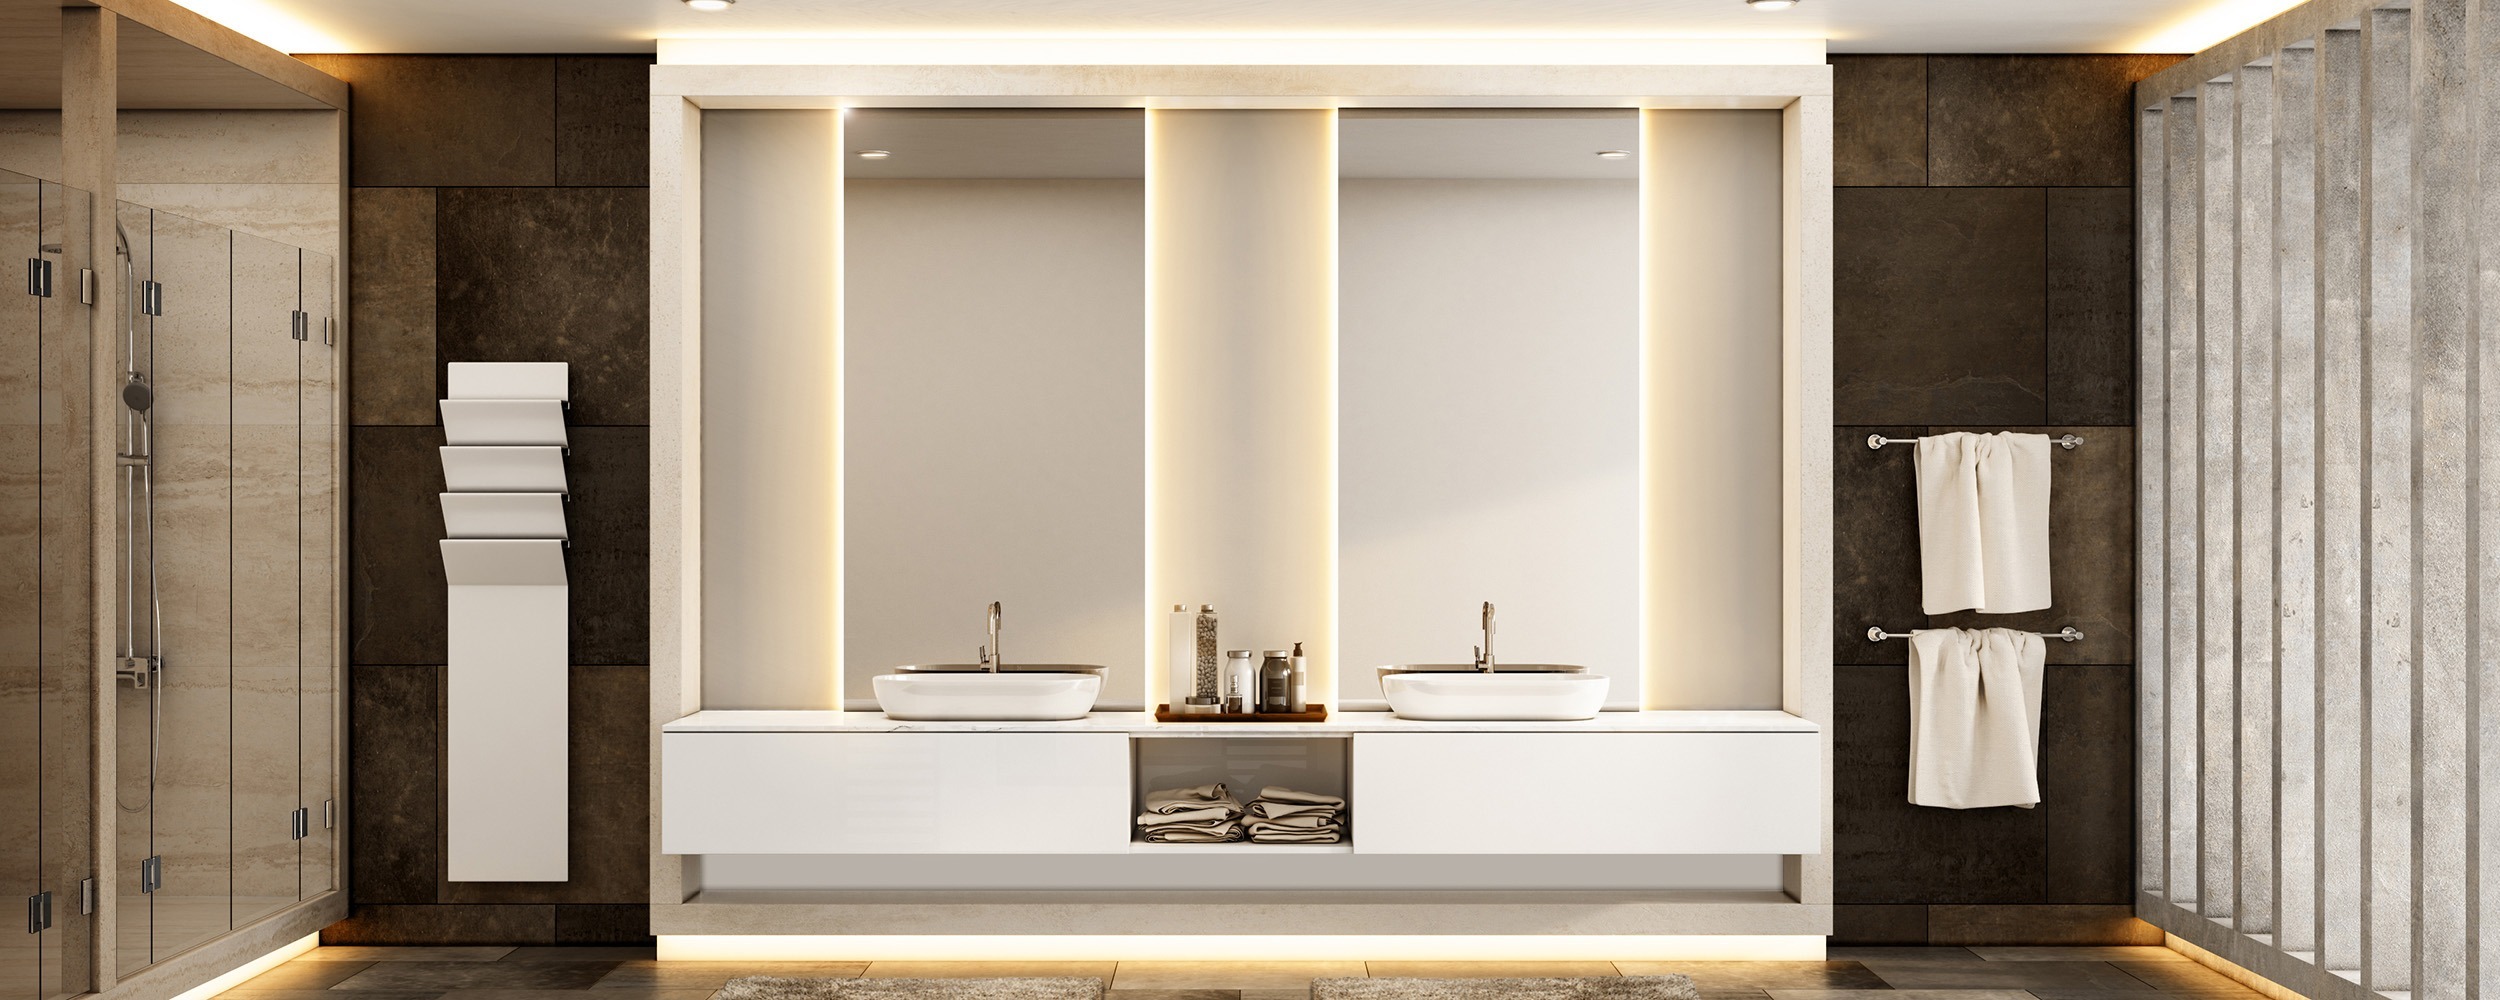 Double Sink Backlit Mirror by Grand Mirrors in a Spa Bathroom